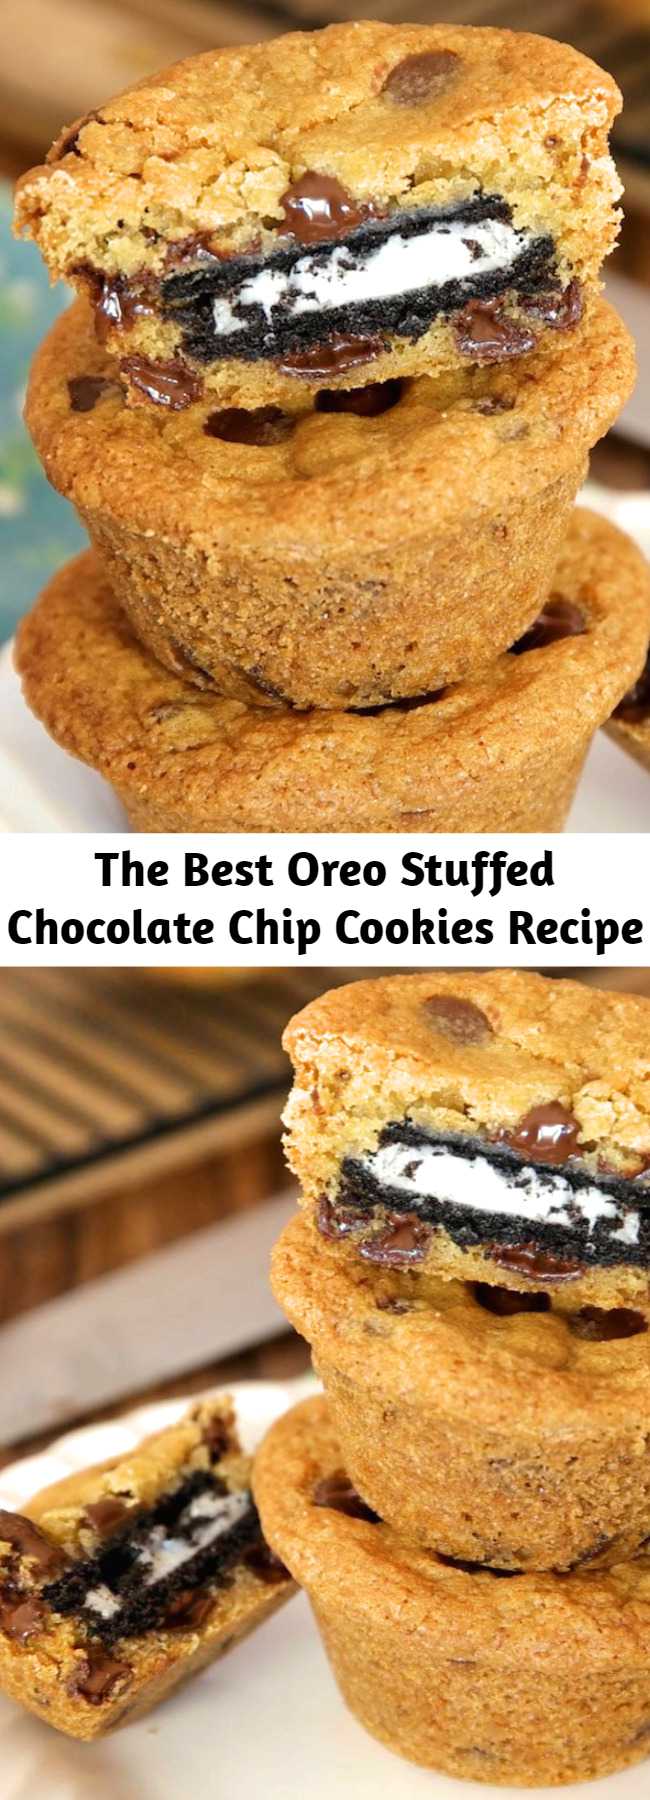 Oreo Stuffed Chocolate Chip Cookies – The BEST soft and chewy chocolate chip cookies stuffed with moist Oreos! They take about 30 minutes to make and all you need is your favorite chocolate chip cookie dough and Oreos! So simple and so delicious!